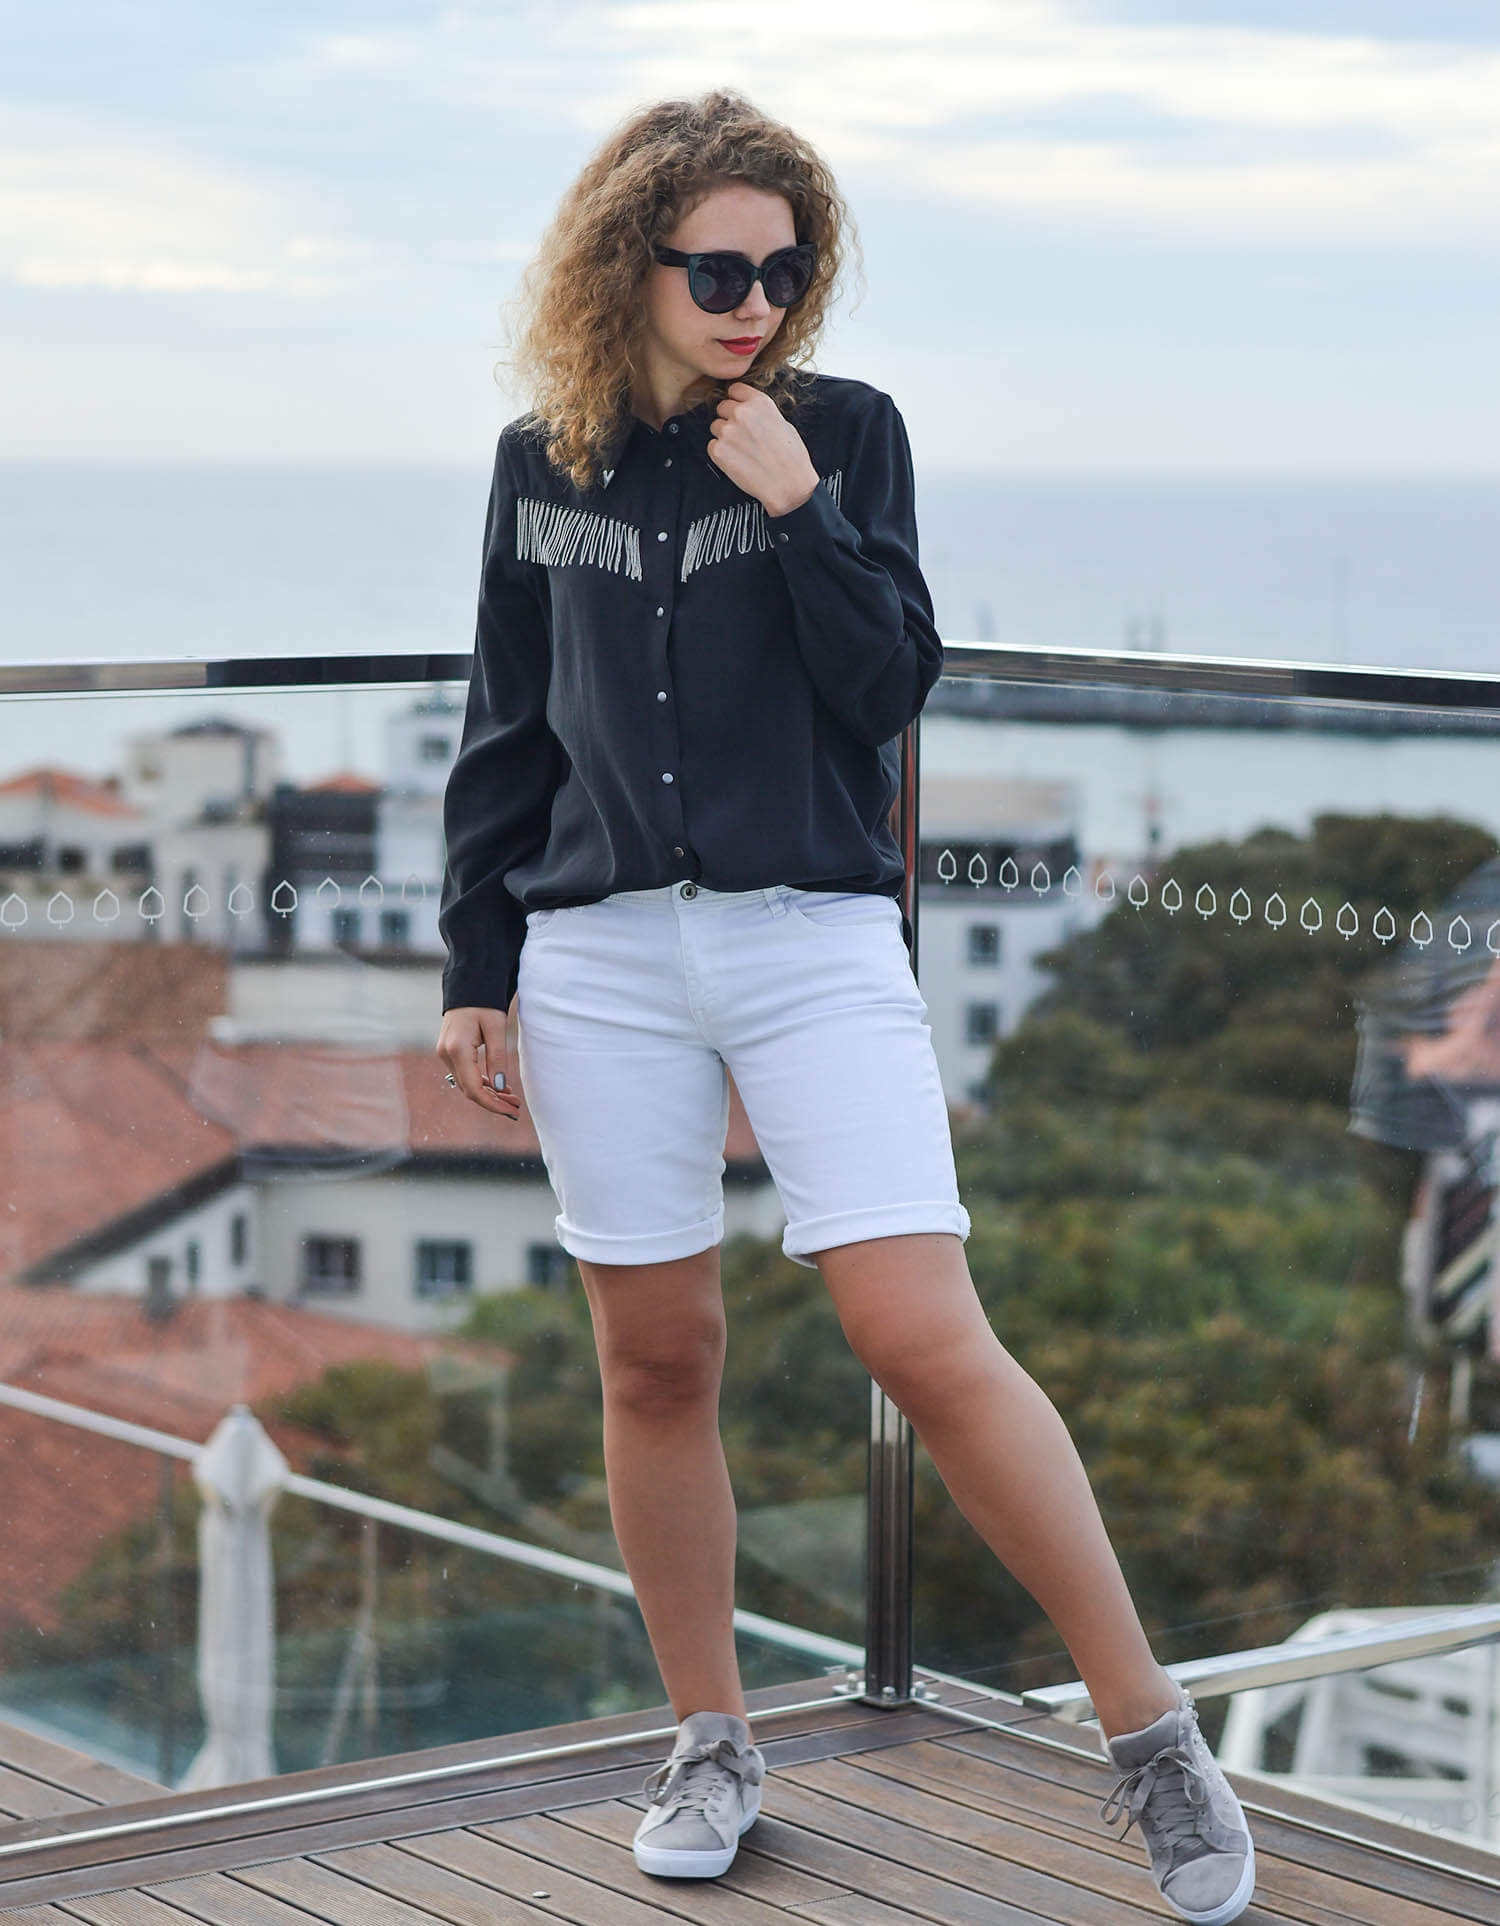 Kationette-fashionblogger-nrw-Outfit-White-Bermudas-Zara-Western-Blouse-and-Velvet-Sneakers-in-Funchal-Madeira